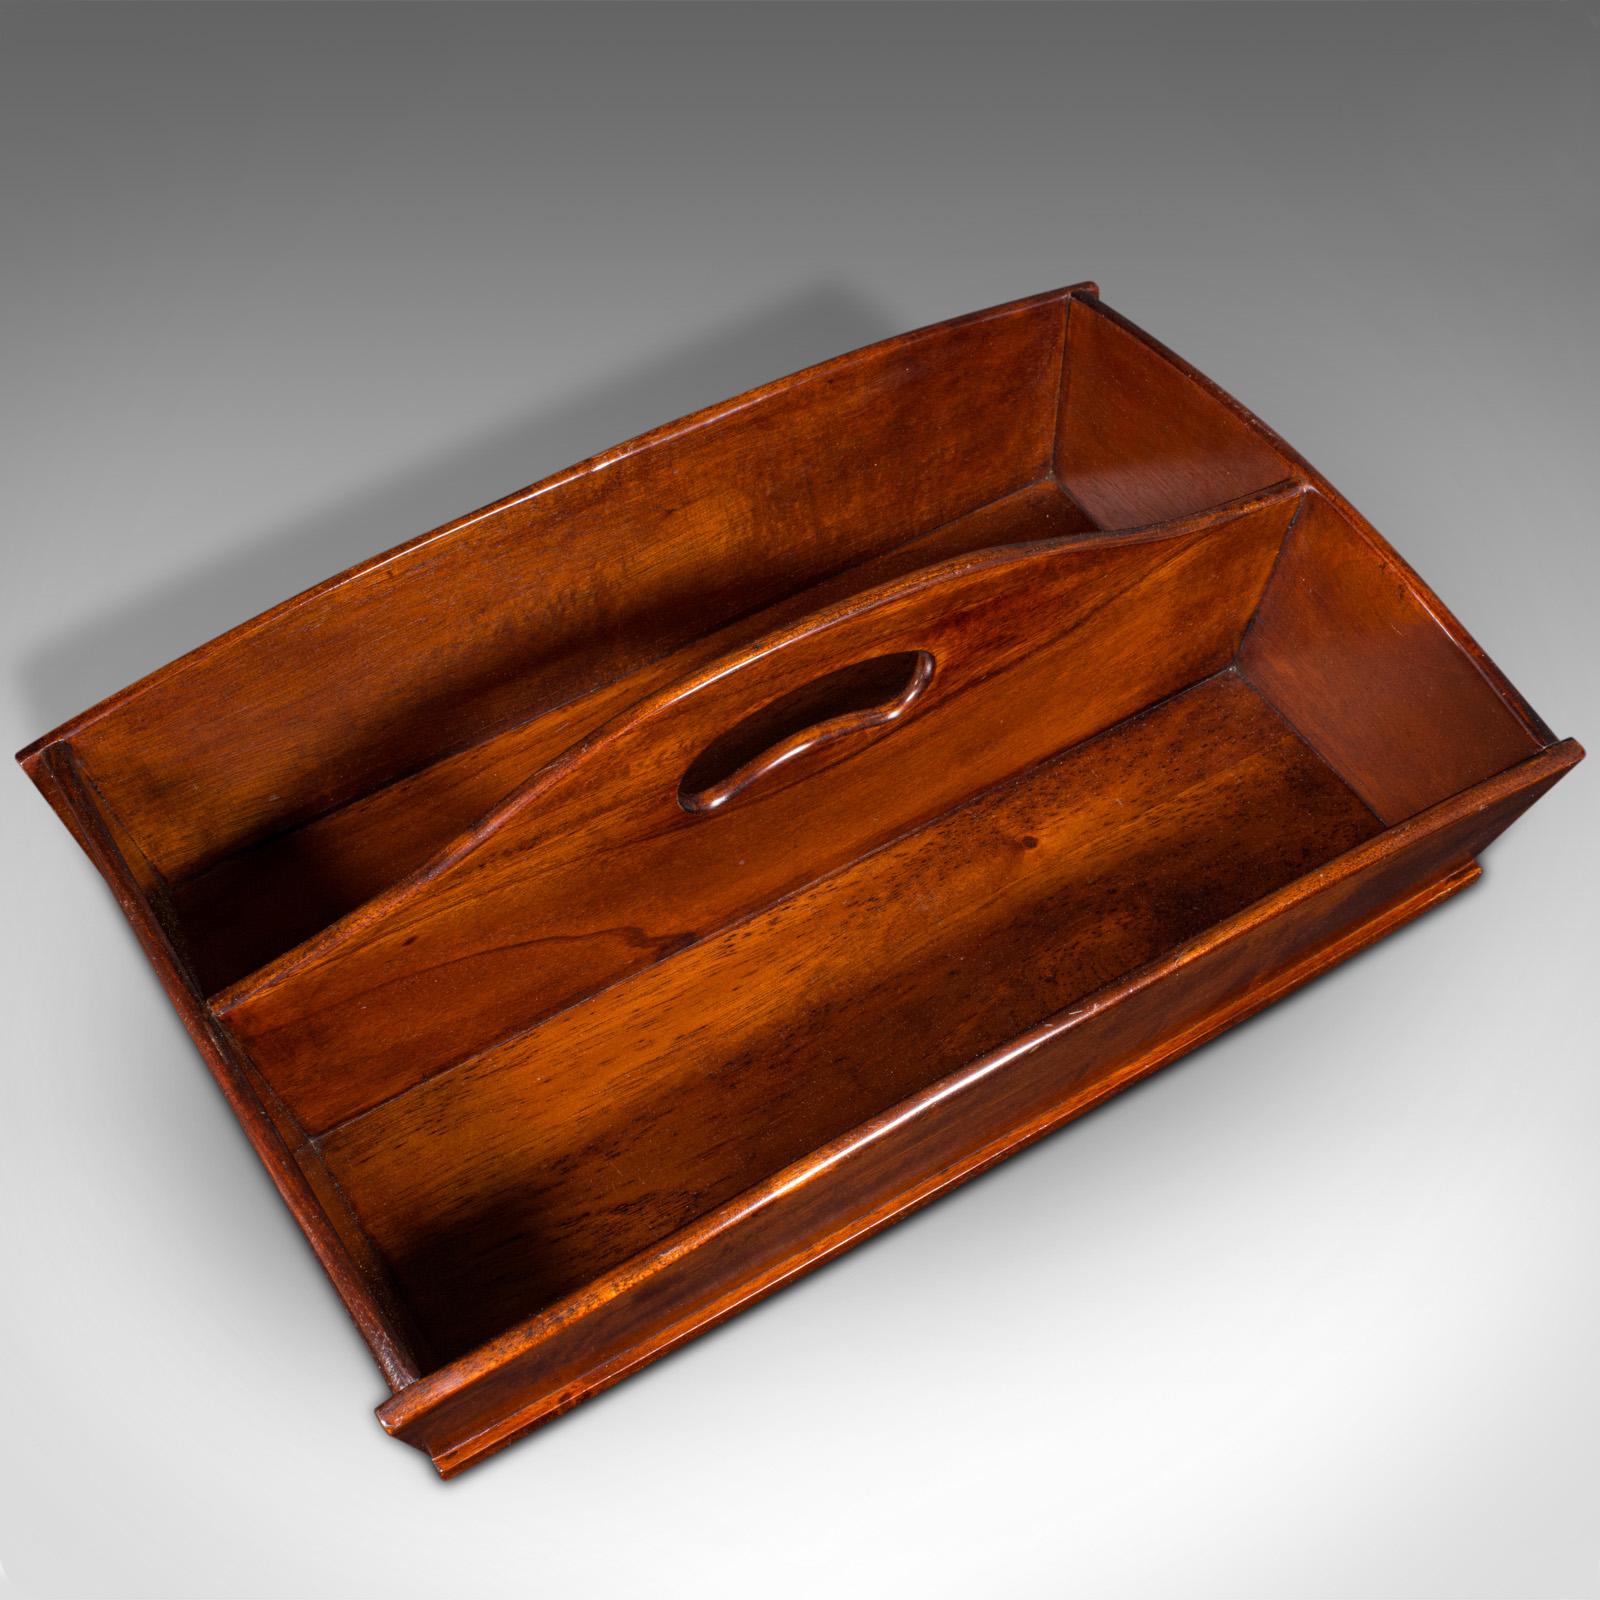 British Antique Valet's Work Box, English, Butler's Carry, Cutlery Tray, Edwardian, 1910 For Sale